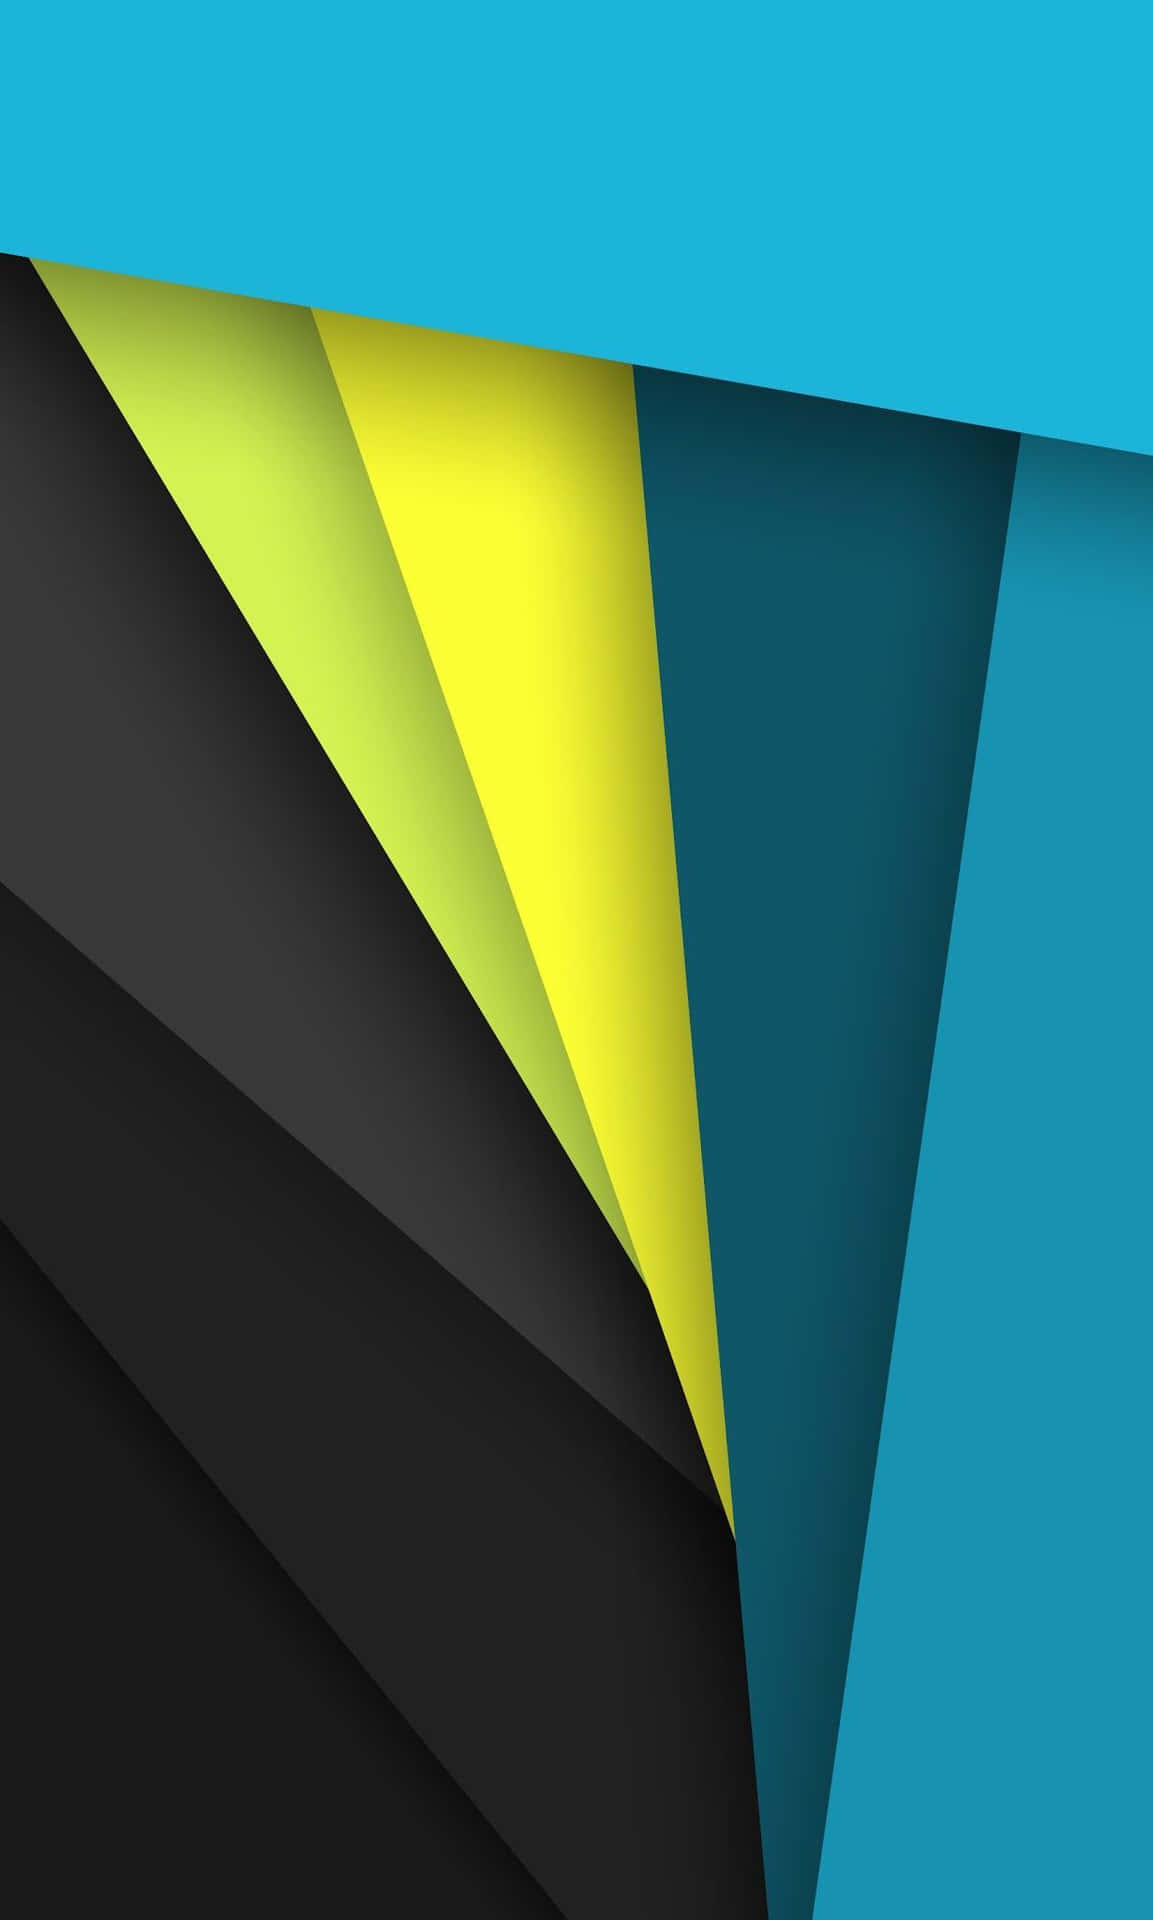 Two Powerful Colors - Black and Teal Wallpaper